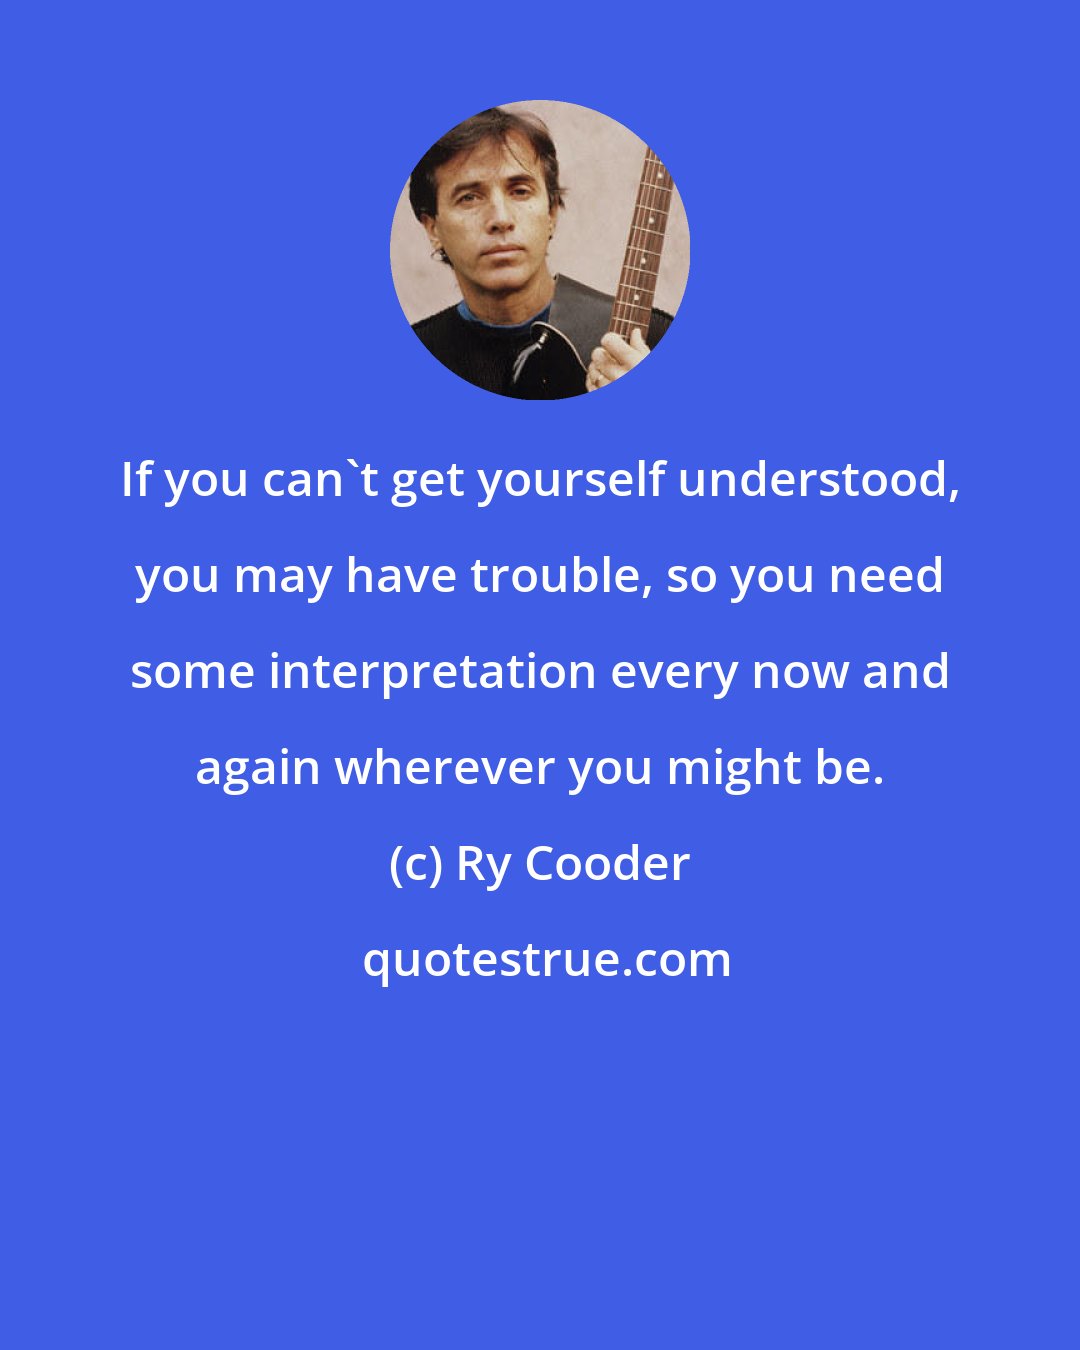 Ry Cooder: If you can't get yourself understood, you may have trouble, so you need some interpretation every now and again wherever you might be.